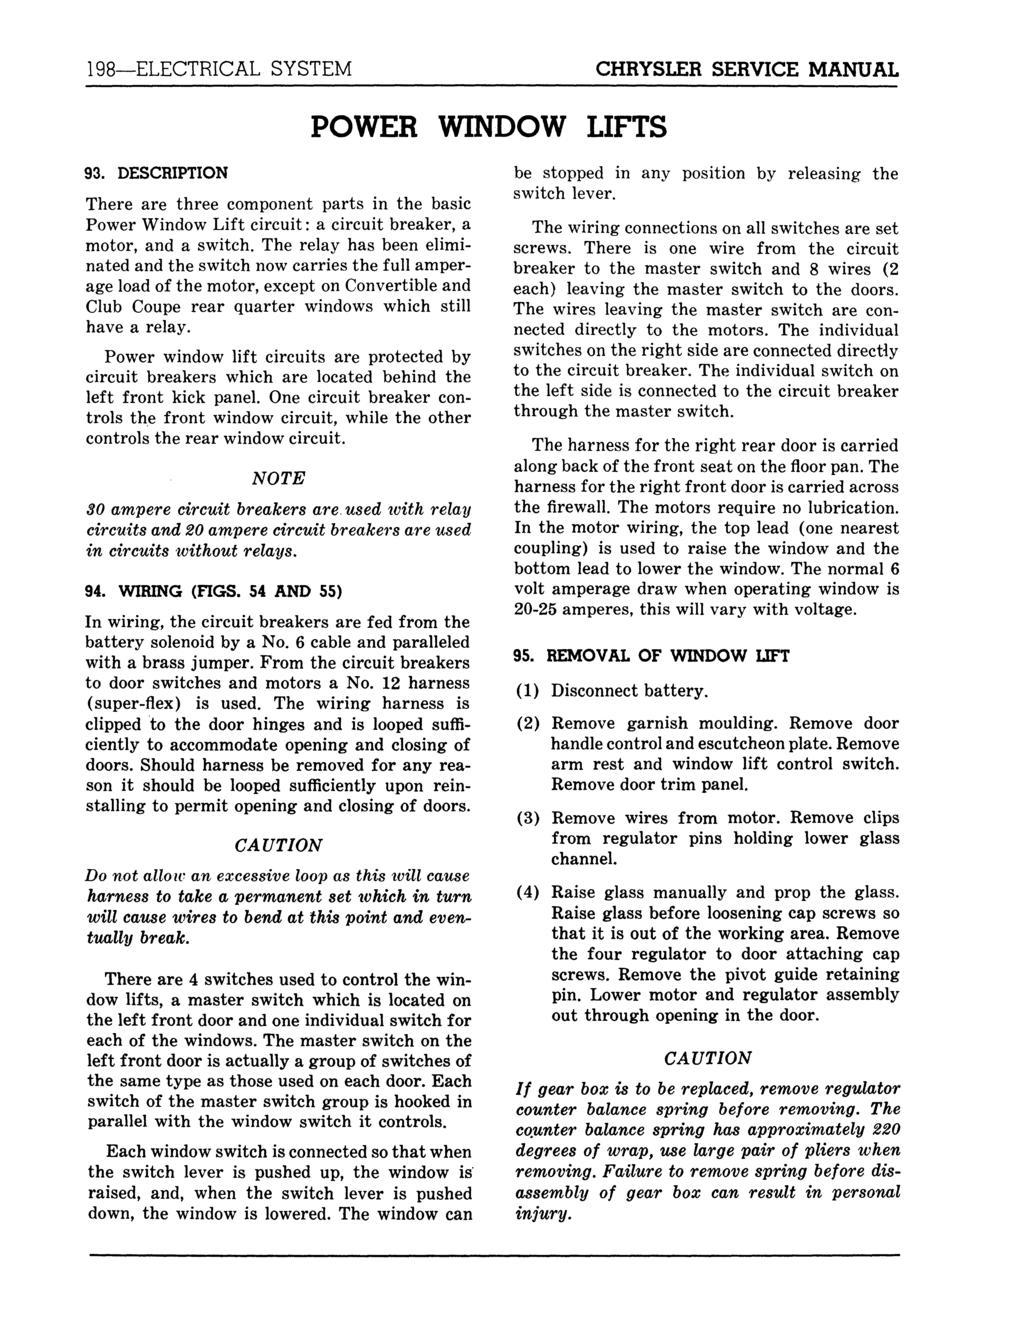 198 ELECTRICAL SYSTEM CHRYSLER SERVICE MANUAL POWER WINDOW LIFTS 93. DESCRIPTION There are three component parts in the basic Power Window Lift circuit: a circuit breaker, a motor, and a switch.